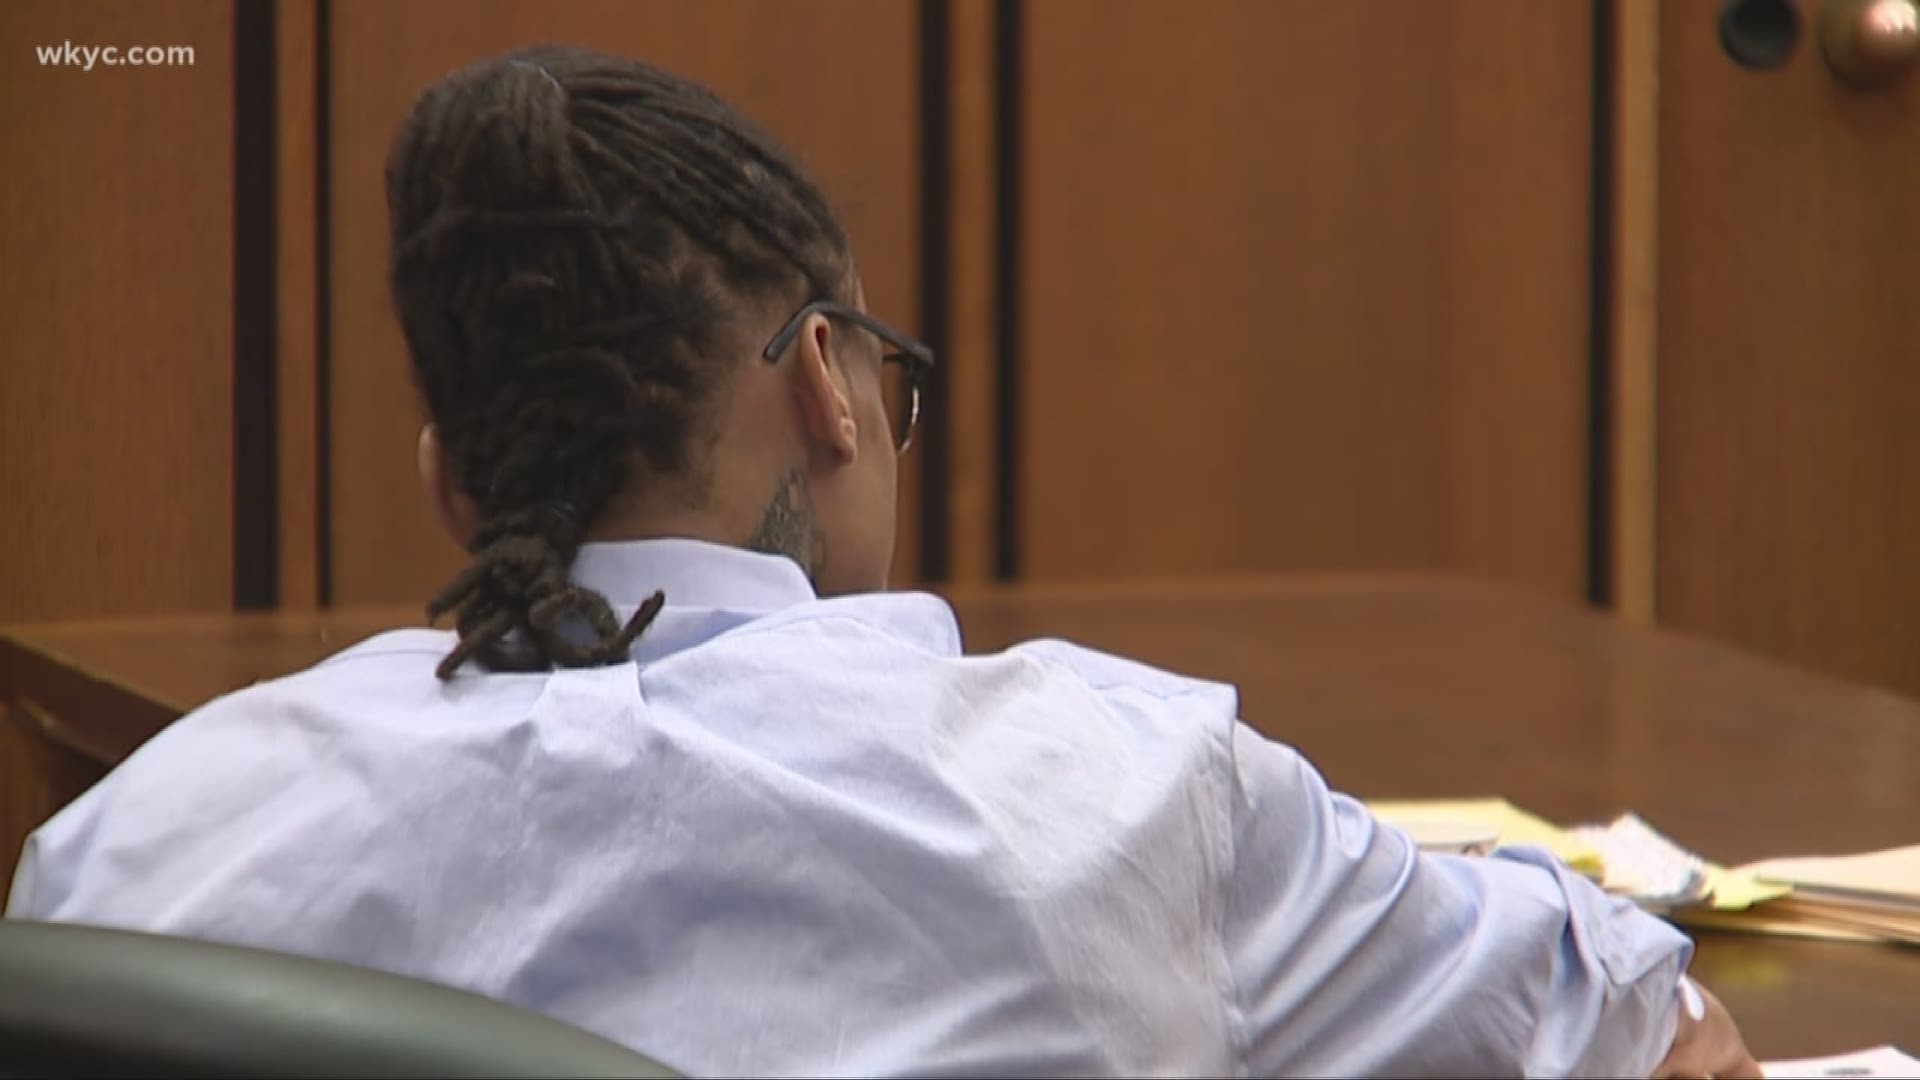 Mr. Cars murder trial continues in third day